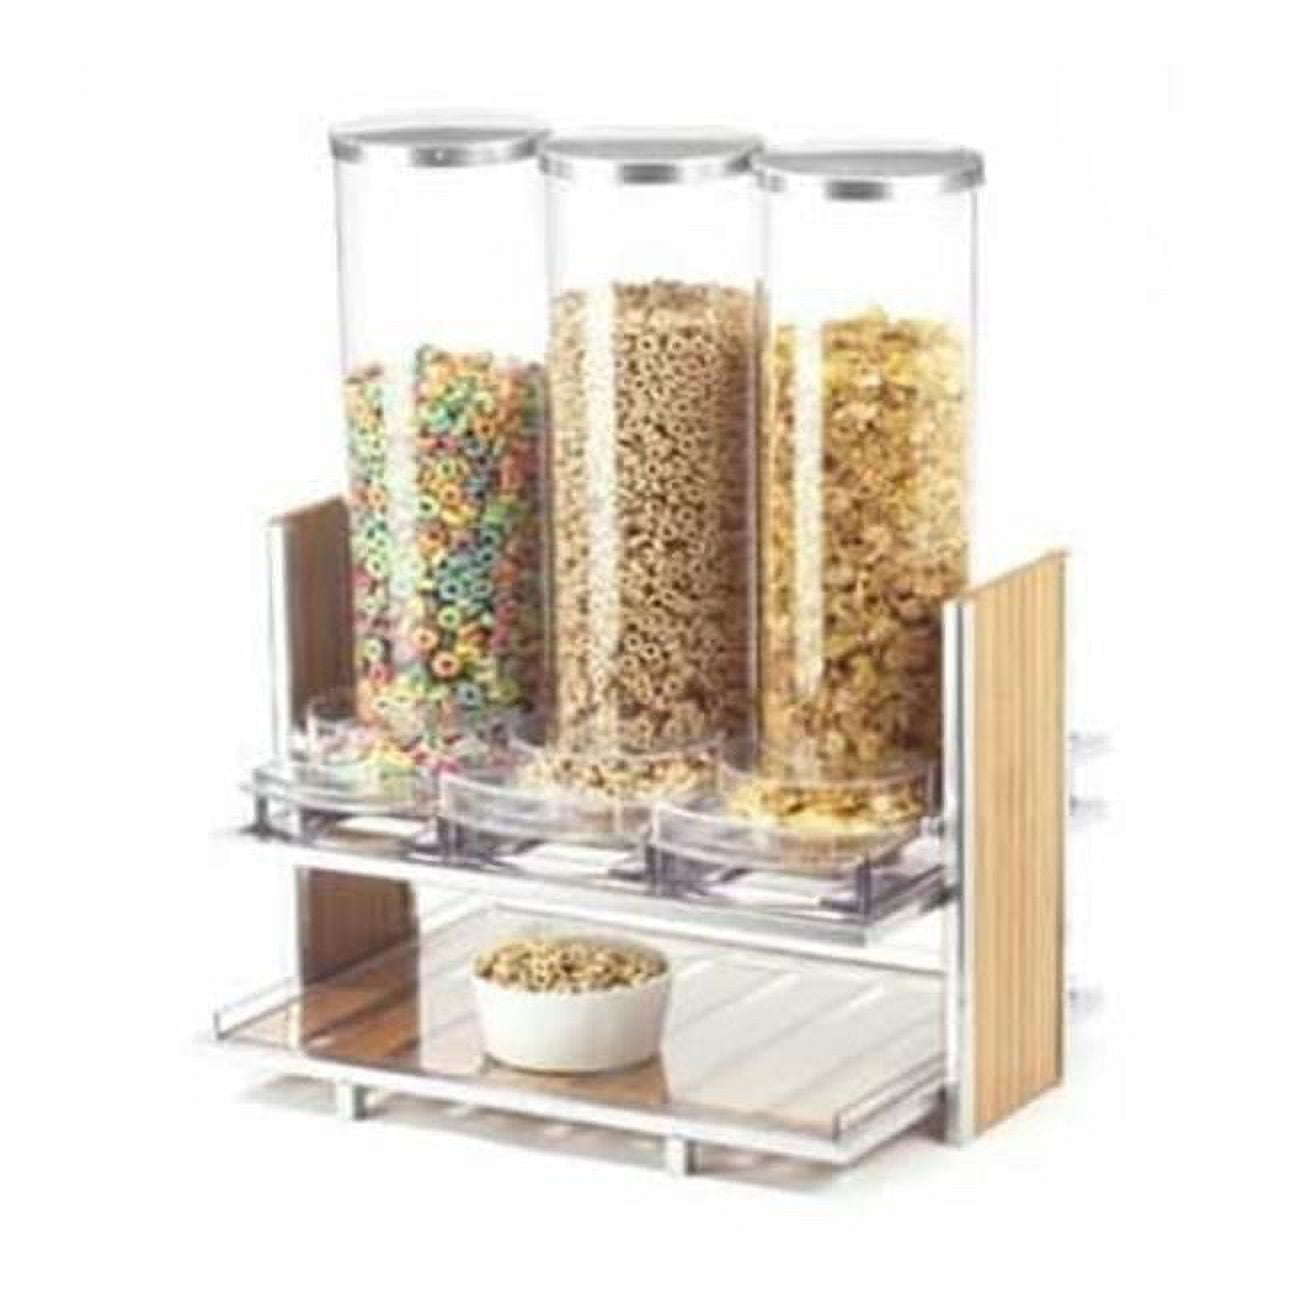 Picture of Cal Mil 1499 Eco Modern Cereal Dispenser with Three 2.7 ltr Bins - 18.25 x 13.25 x 24.5 in.